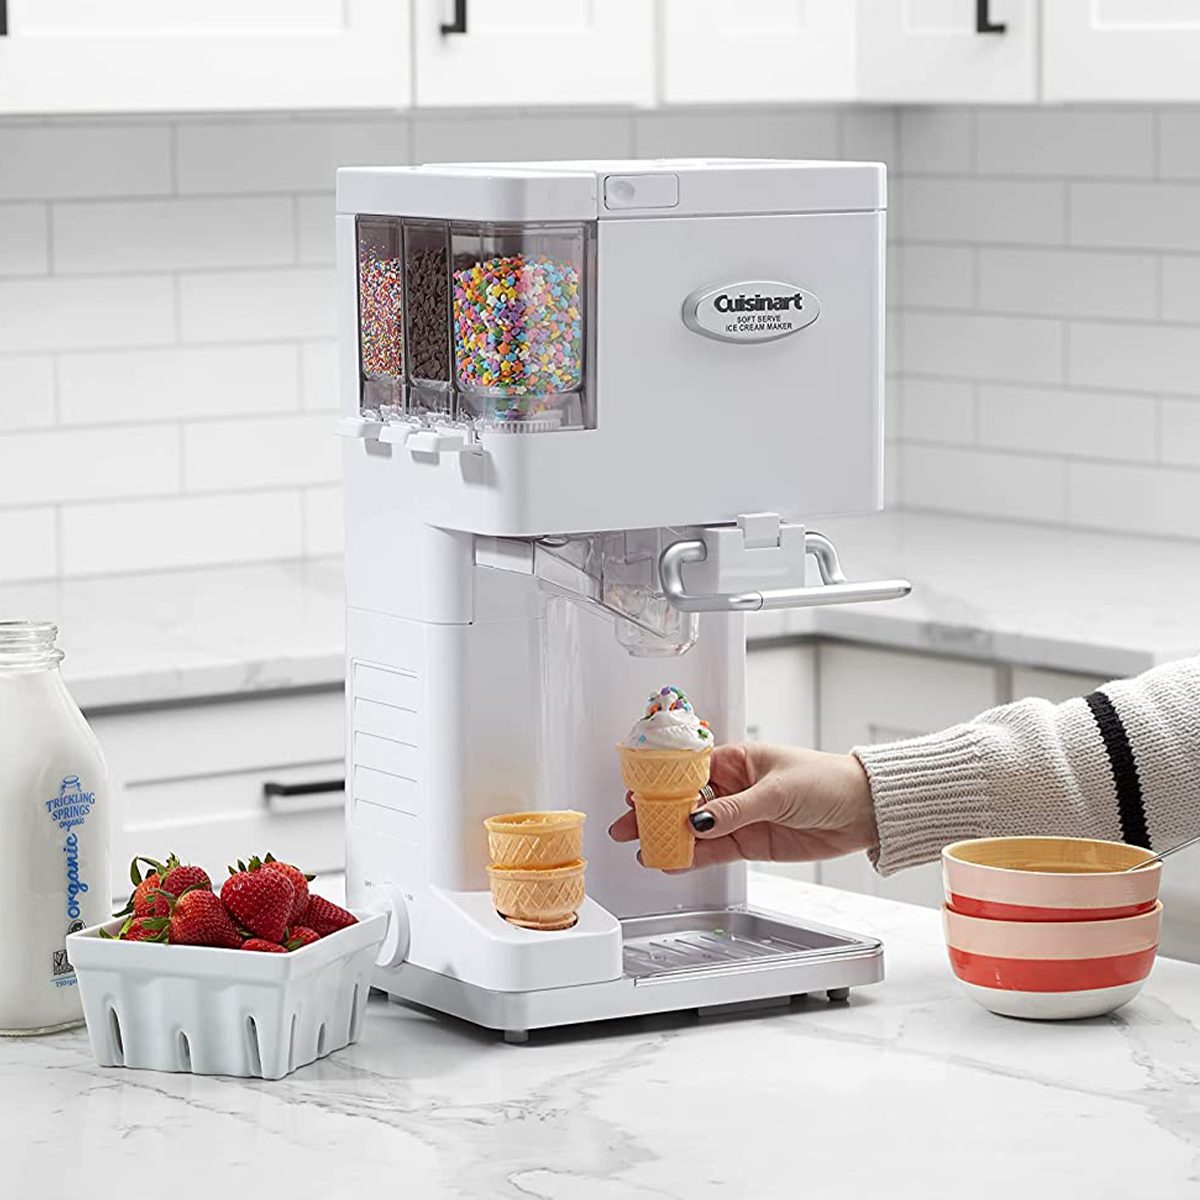 How Long Does It Take To Make Ice Cream In A Cuisinart Ice Cream Maker?